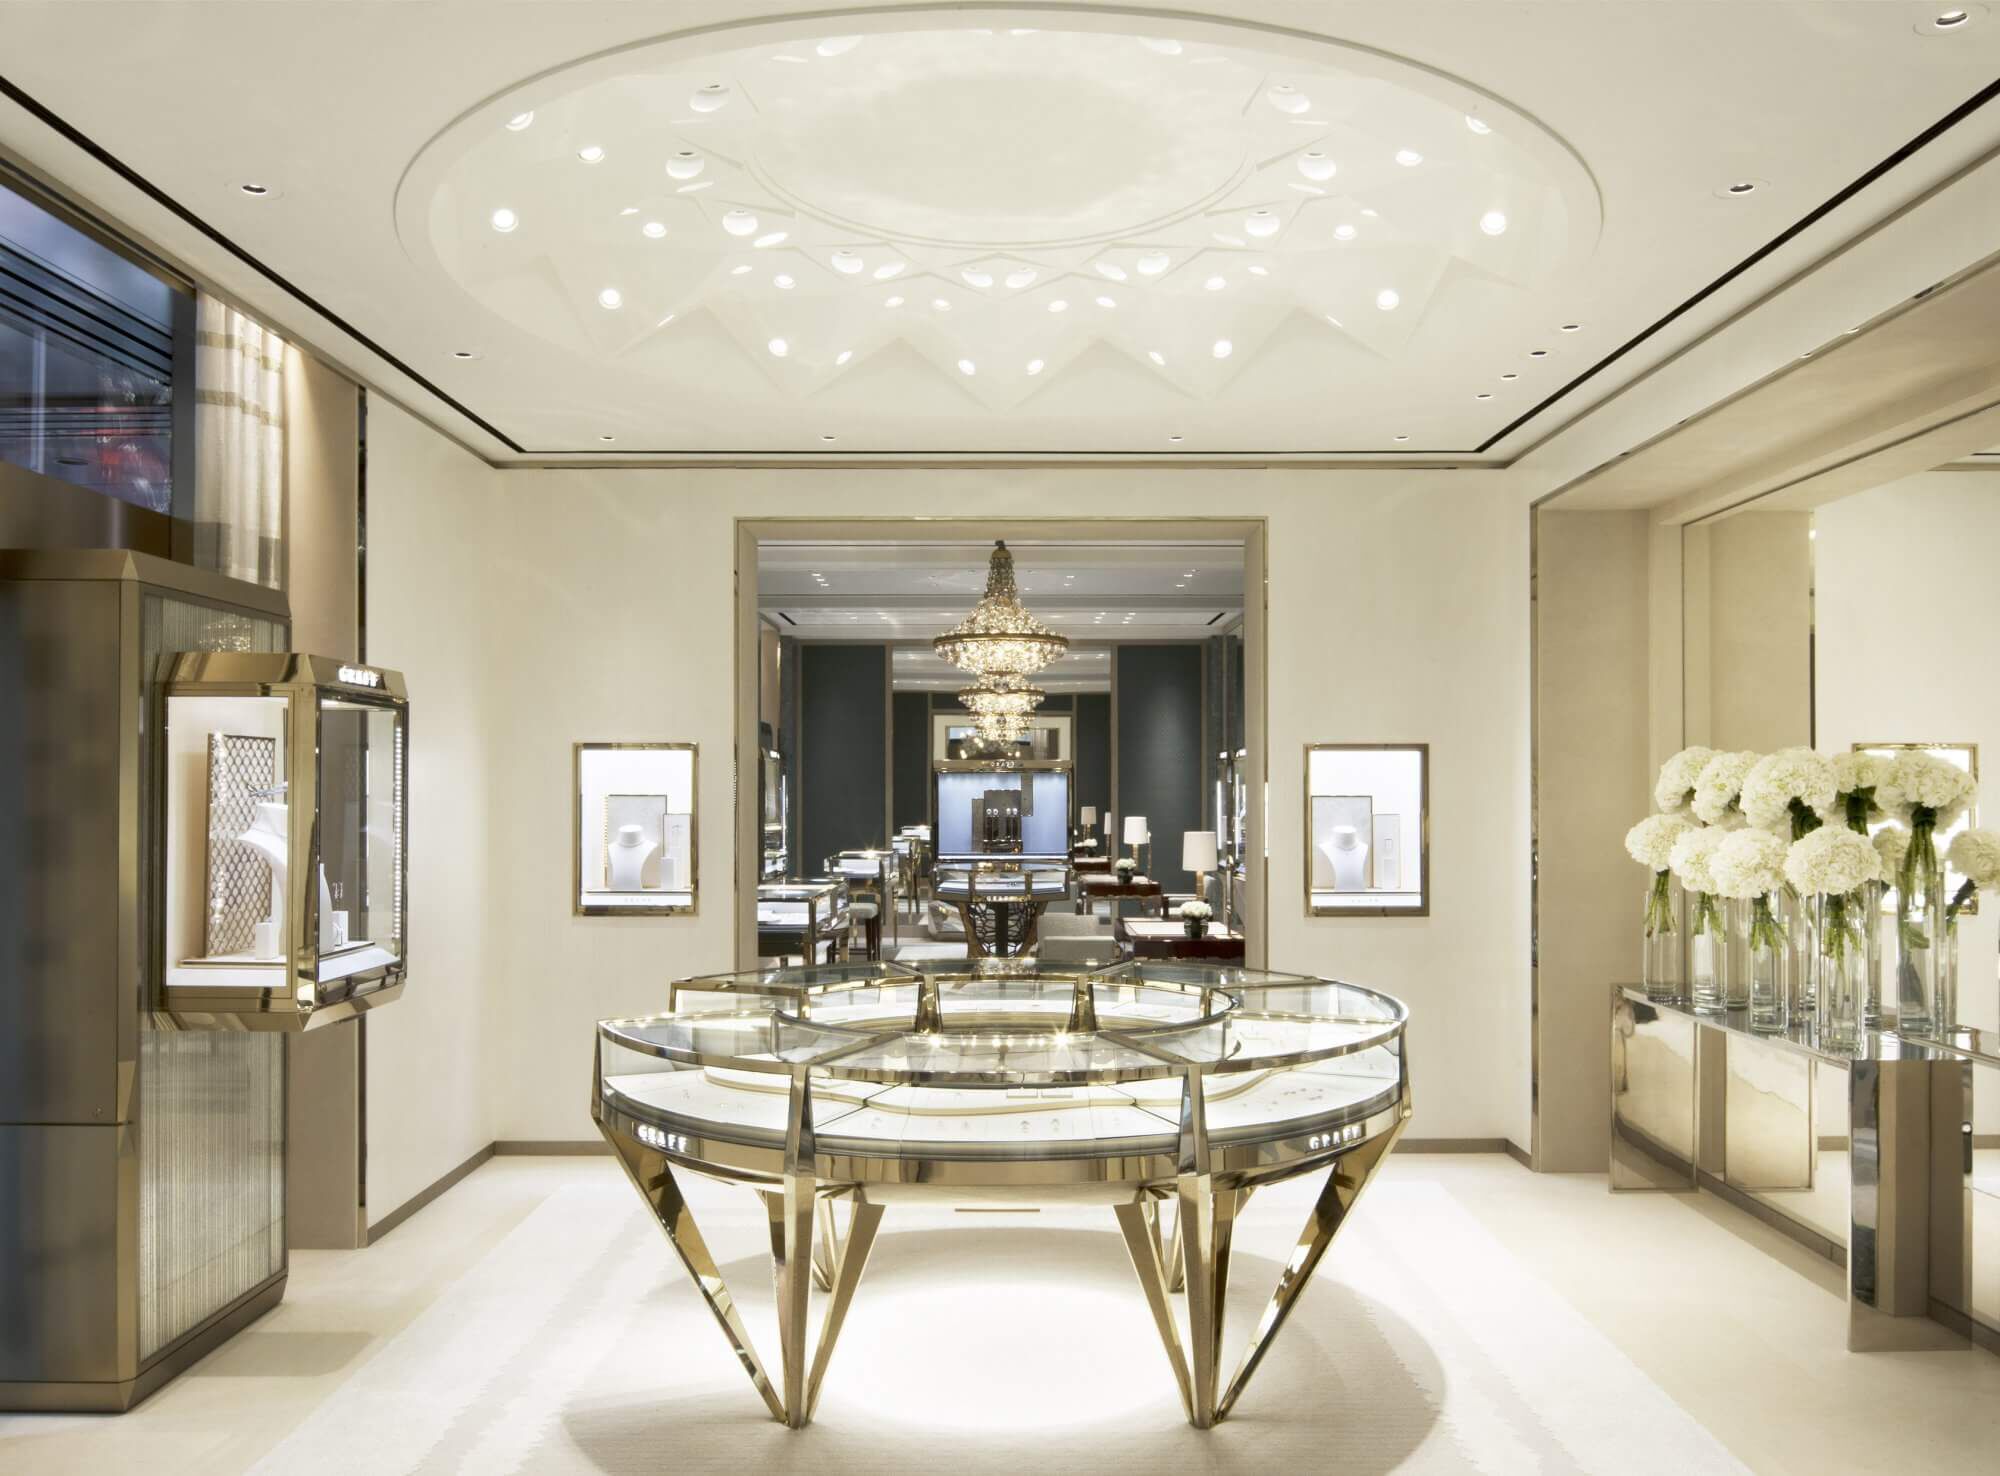 The Graff New Flagship Store in Hong Kong Central the Bridal Jewellery Room